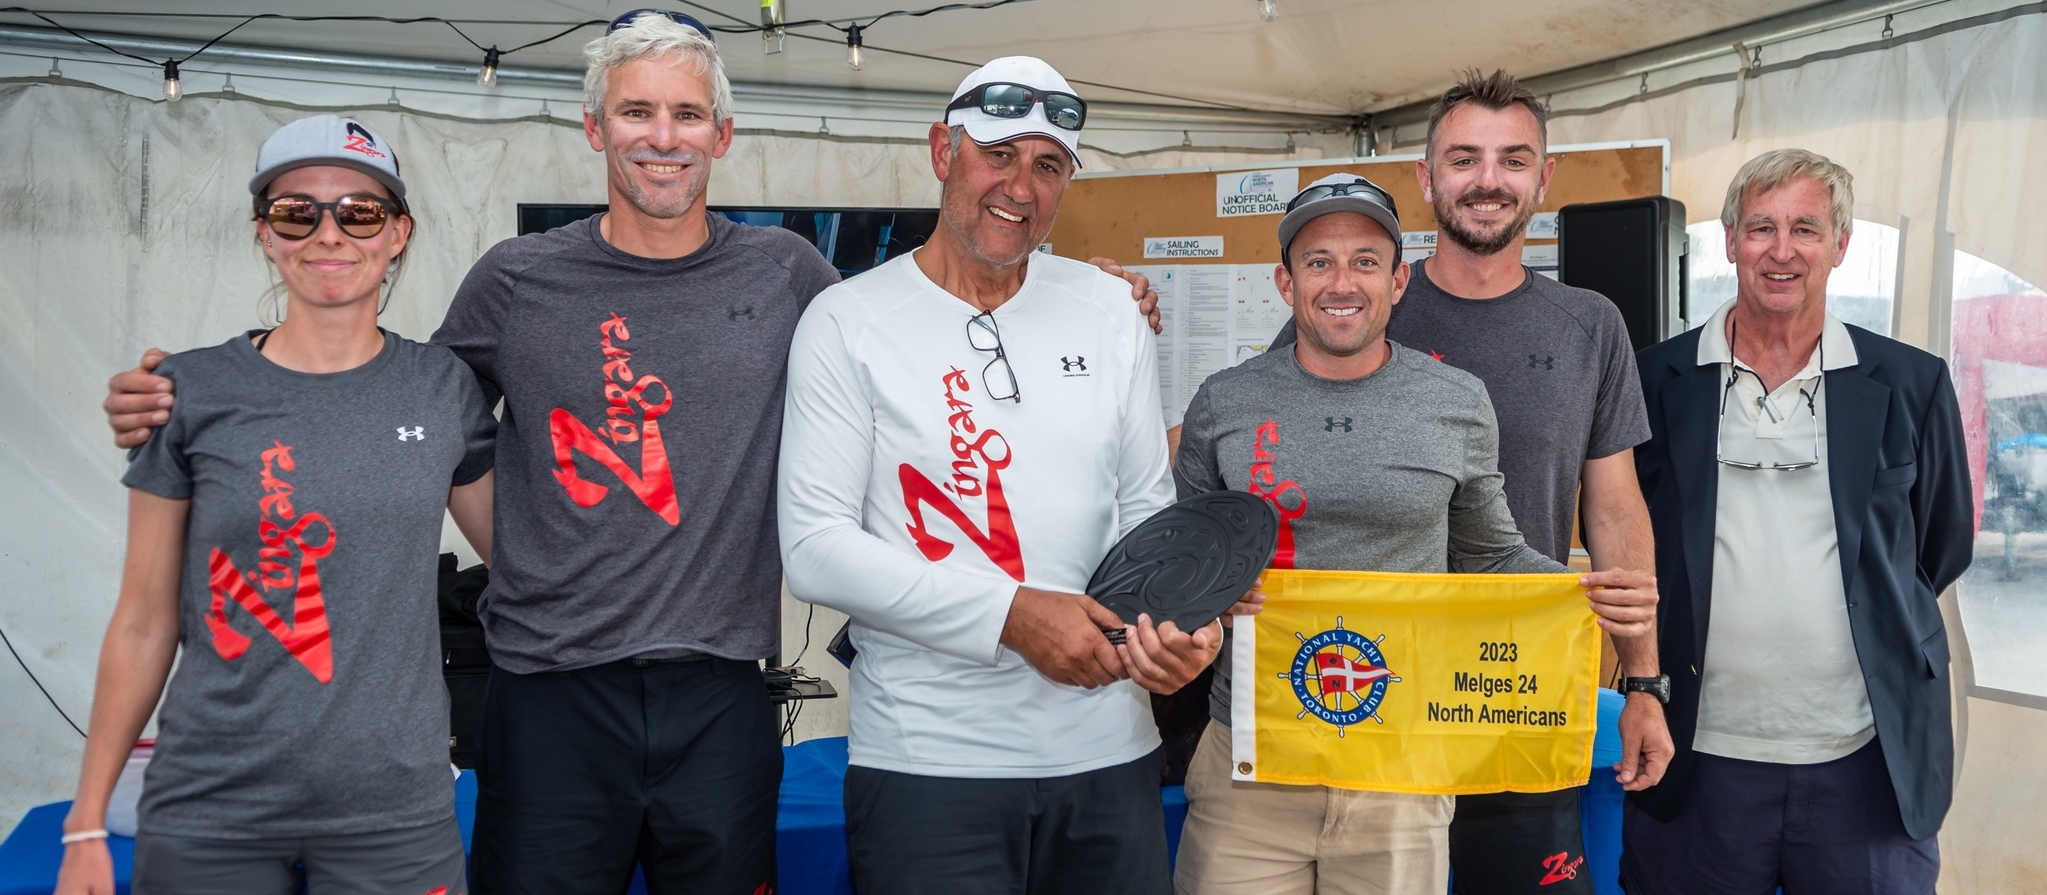 2023 Melges 24 North American Champions Crowned